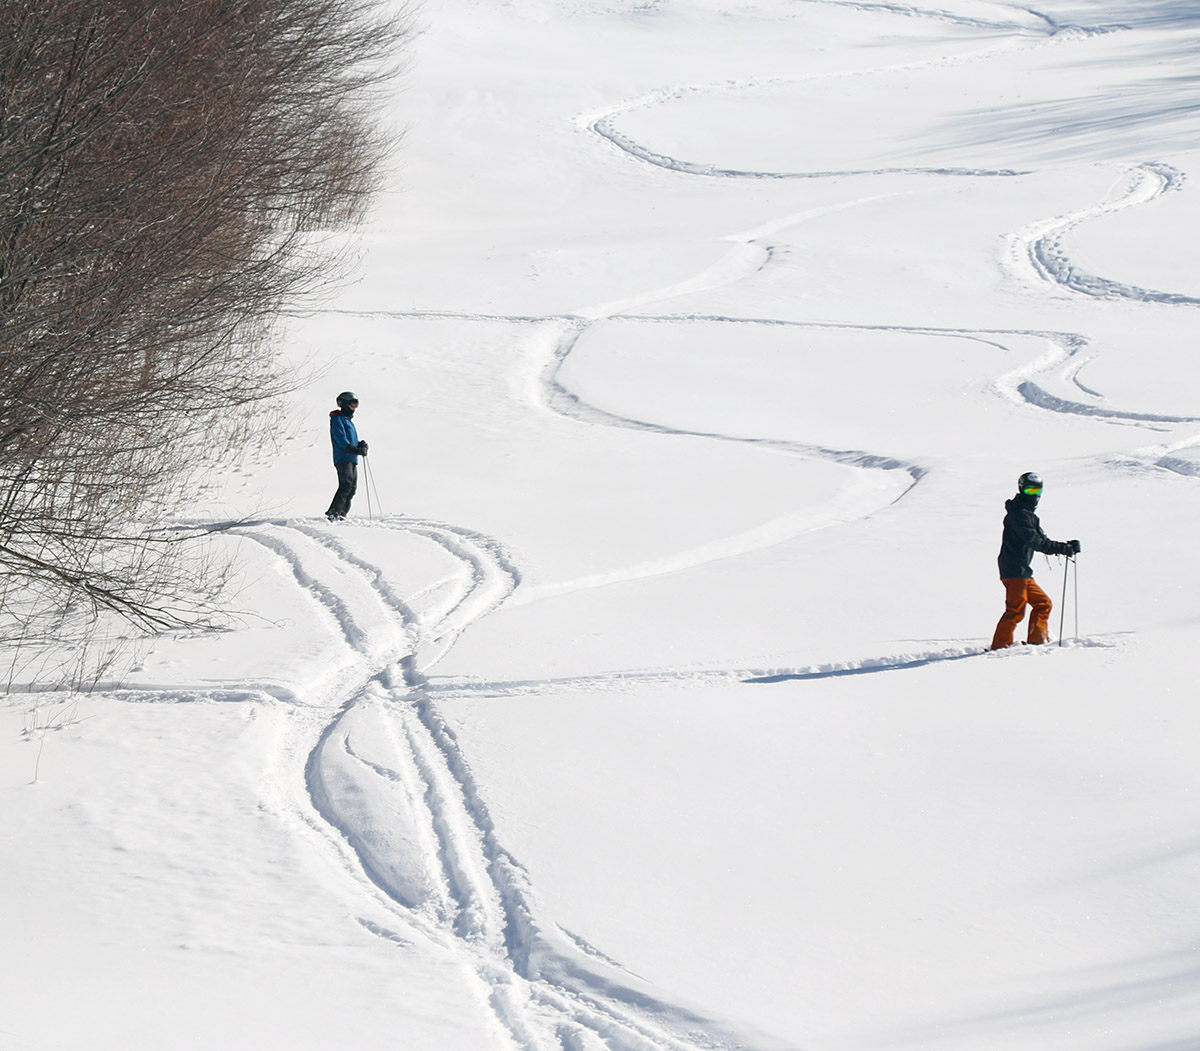 An image of Erica and Tyler getting ready to ski some powder from Winter Storm Oaklee below the Spell Binder headwall at Bolton Valley Resort in Vermont